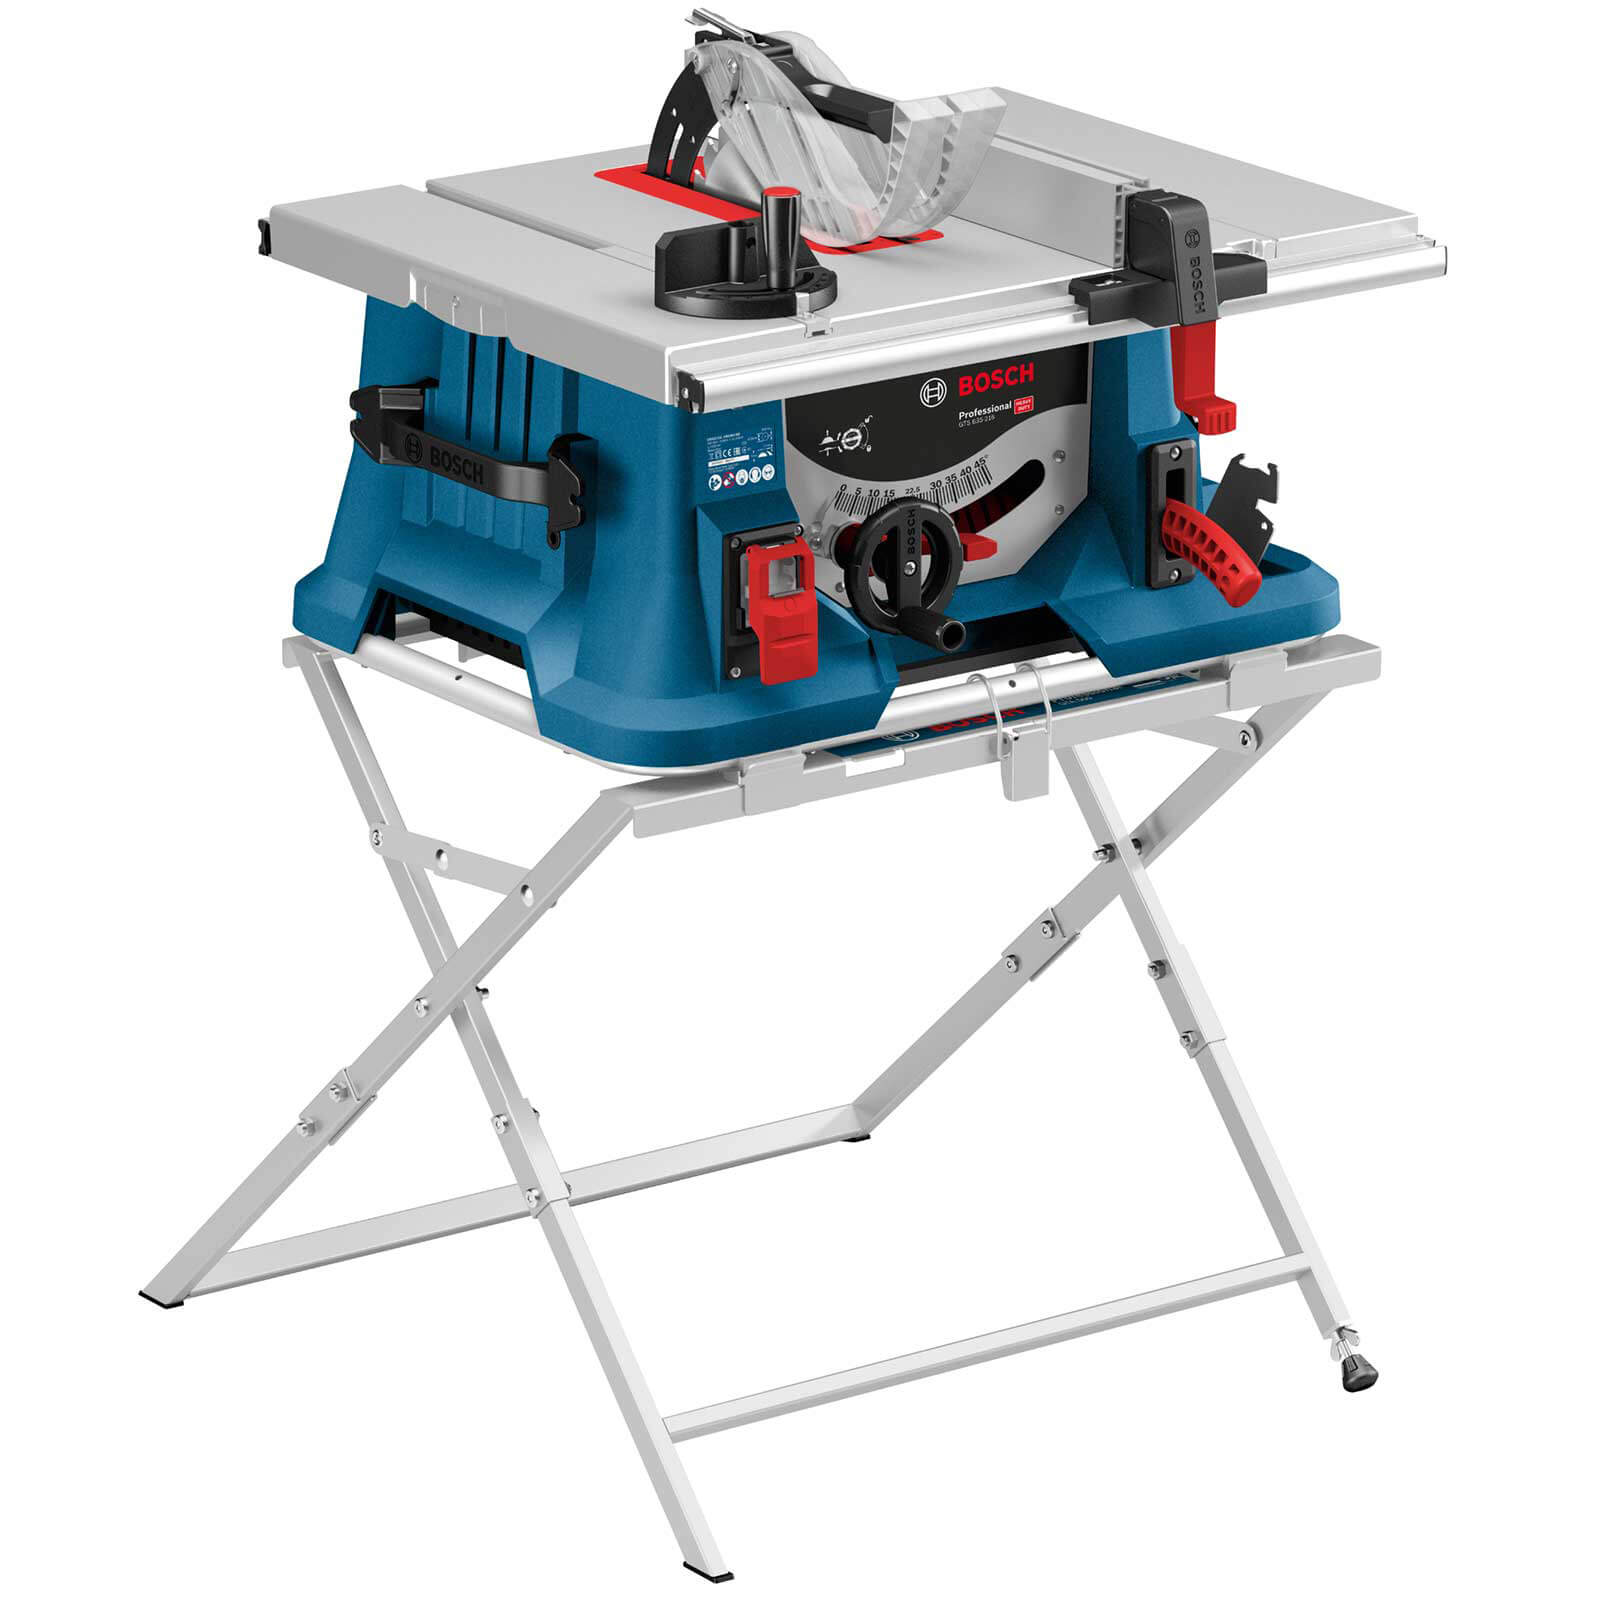 Bosch GTS 635-216 Table Saw and GTA560 Saw Stand | Table Saws